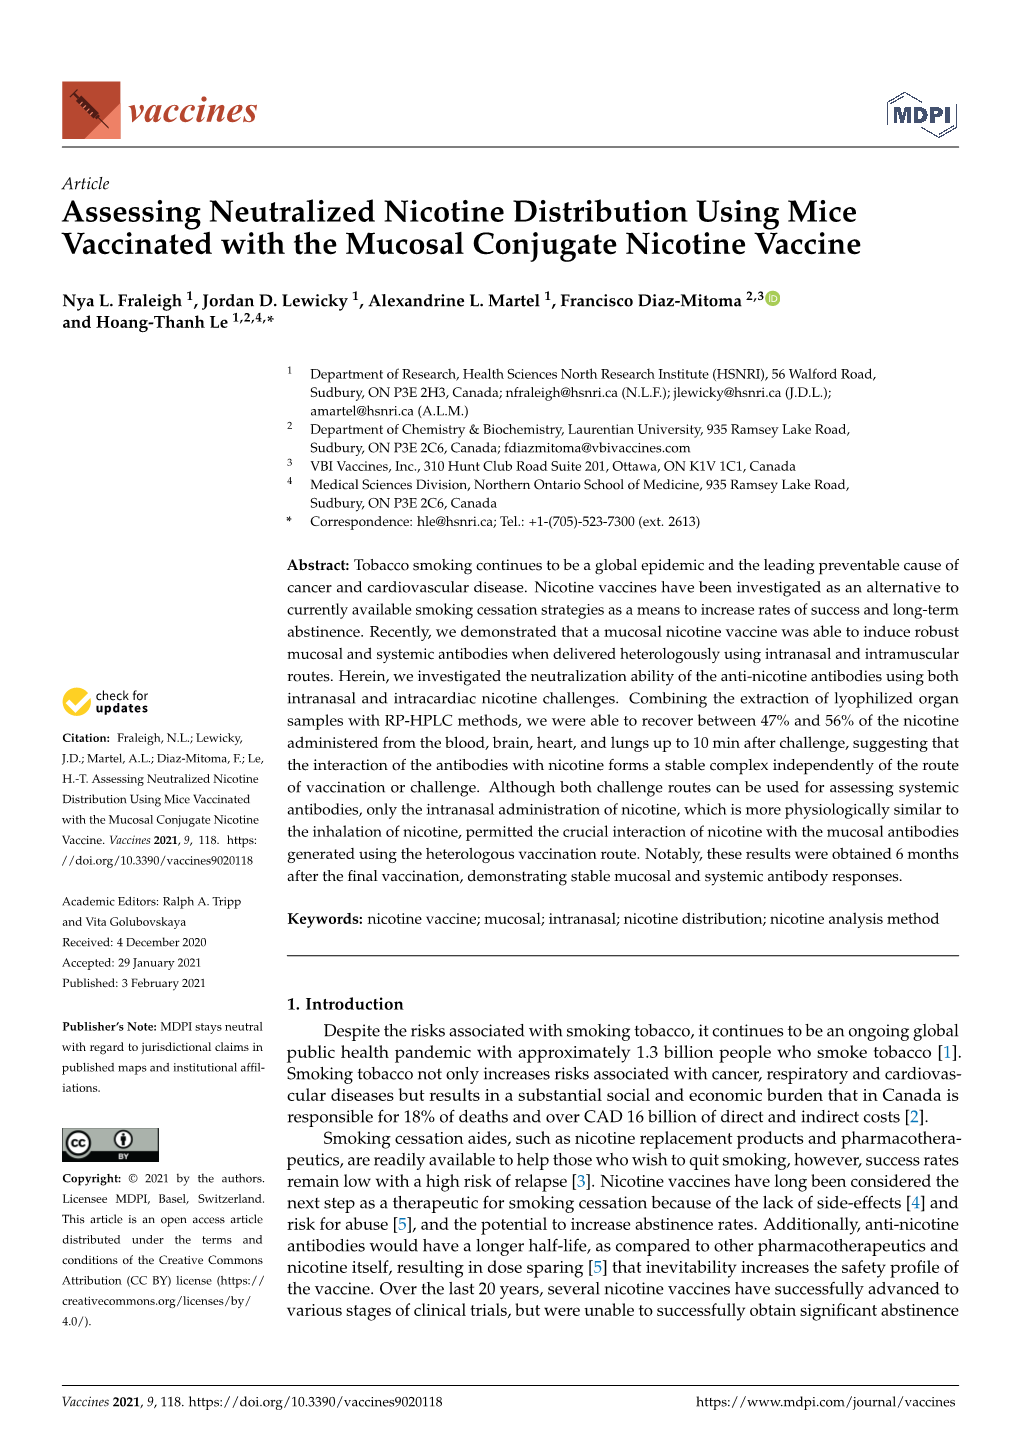 Assessing Neutralized Nicotine Distribution Using Mice Vaccinated with the Mucosal Conjugate Nicotine Vaccine